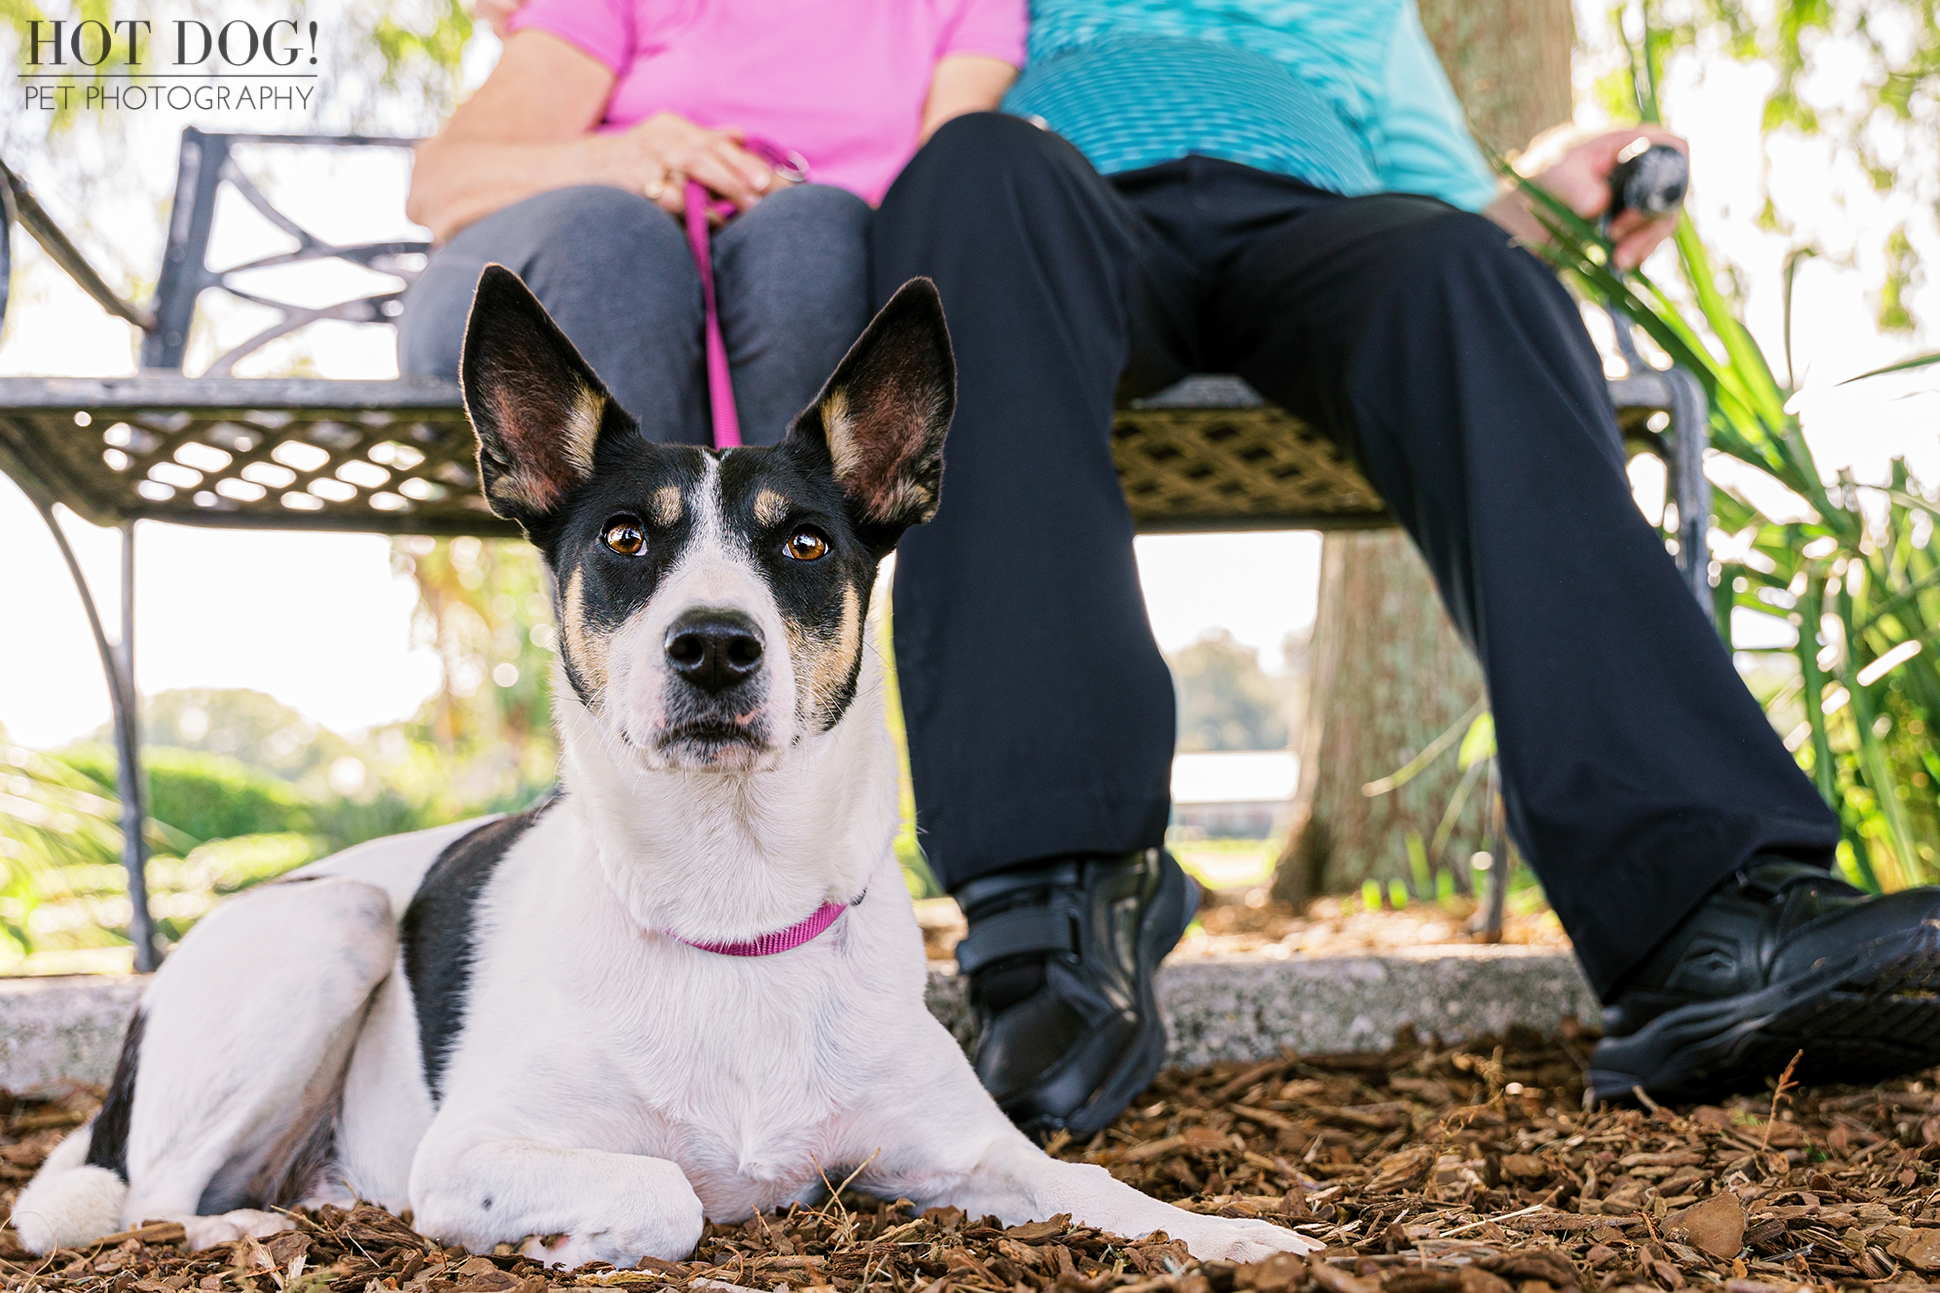 Tiny Paws, Big Hearts: Orlando pet photographer Hot Dog! Pet Photography captures the boundless love between Miracle, the rescued rat terrier mix, and her devoted adopted parents.